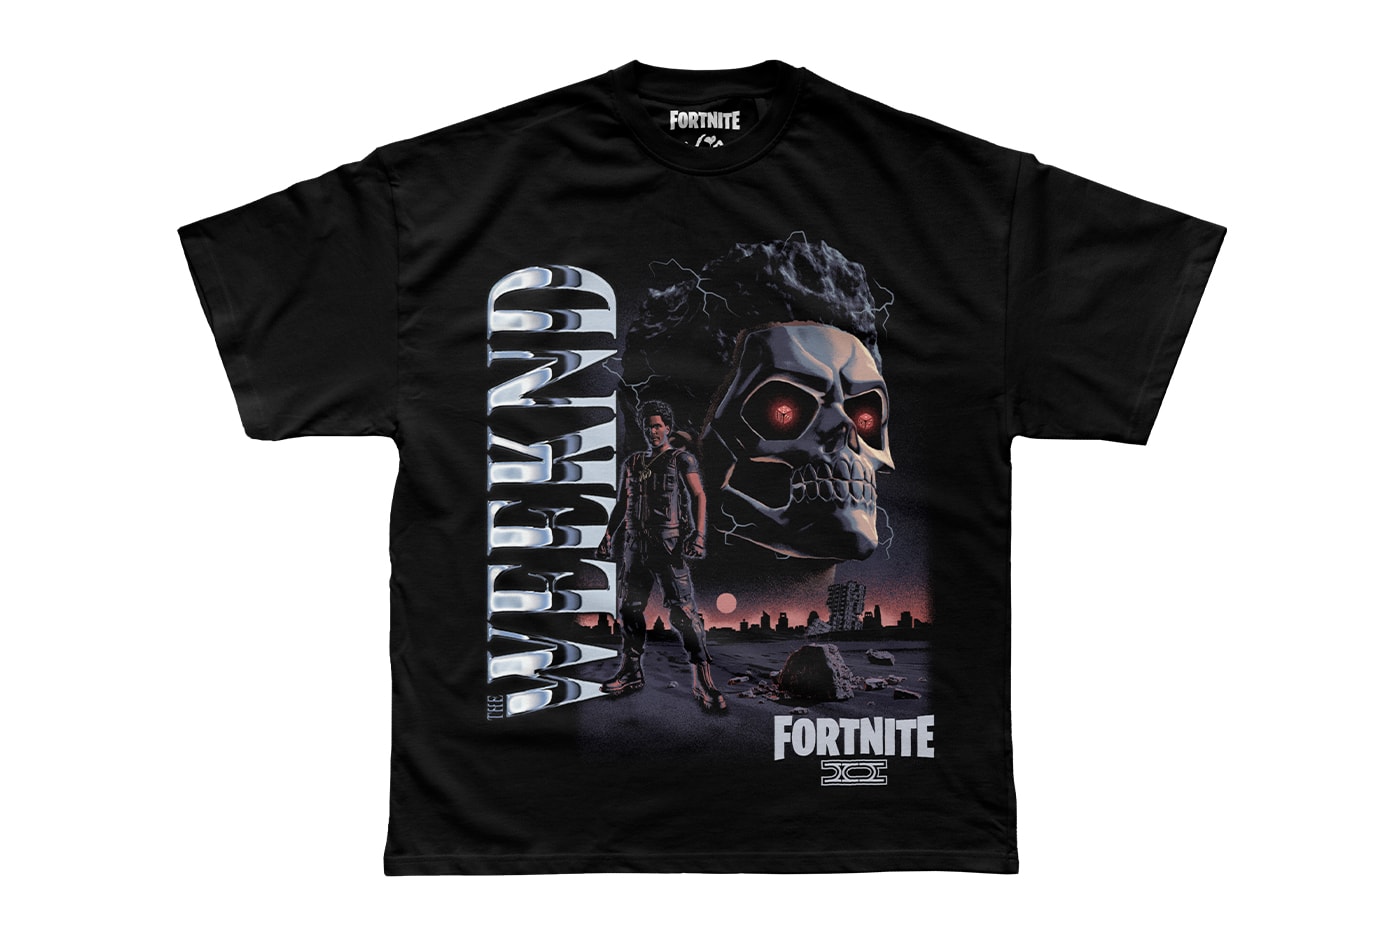 The Weeknd and ‘Fortnite’ Continue Their Partnership With Merch Collab Fashion